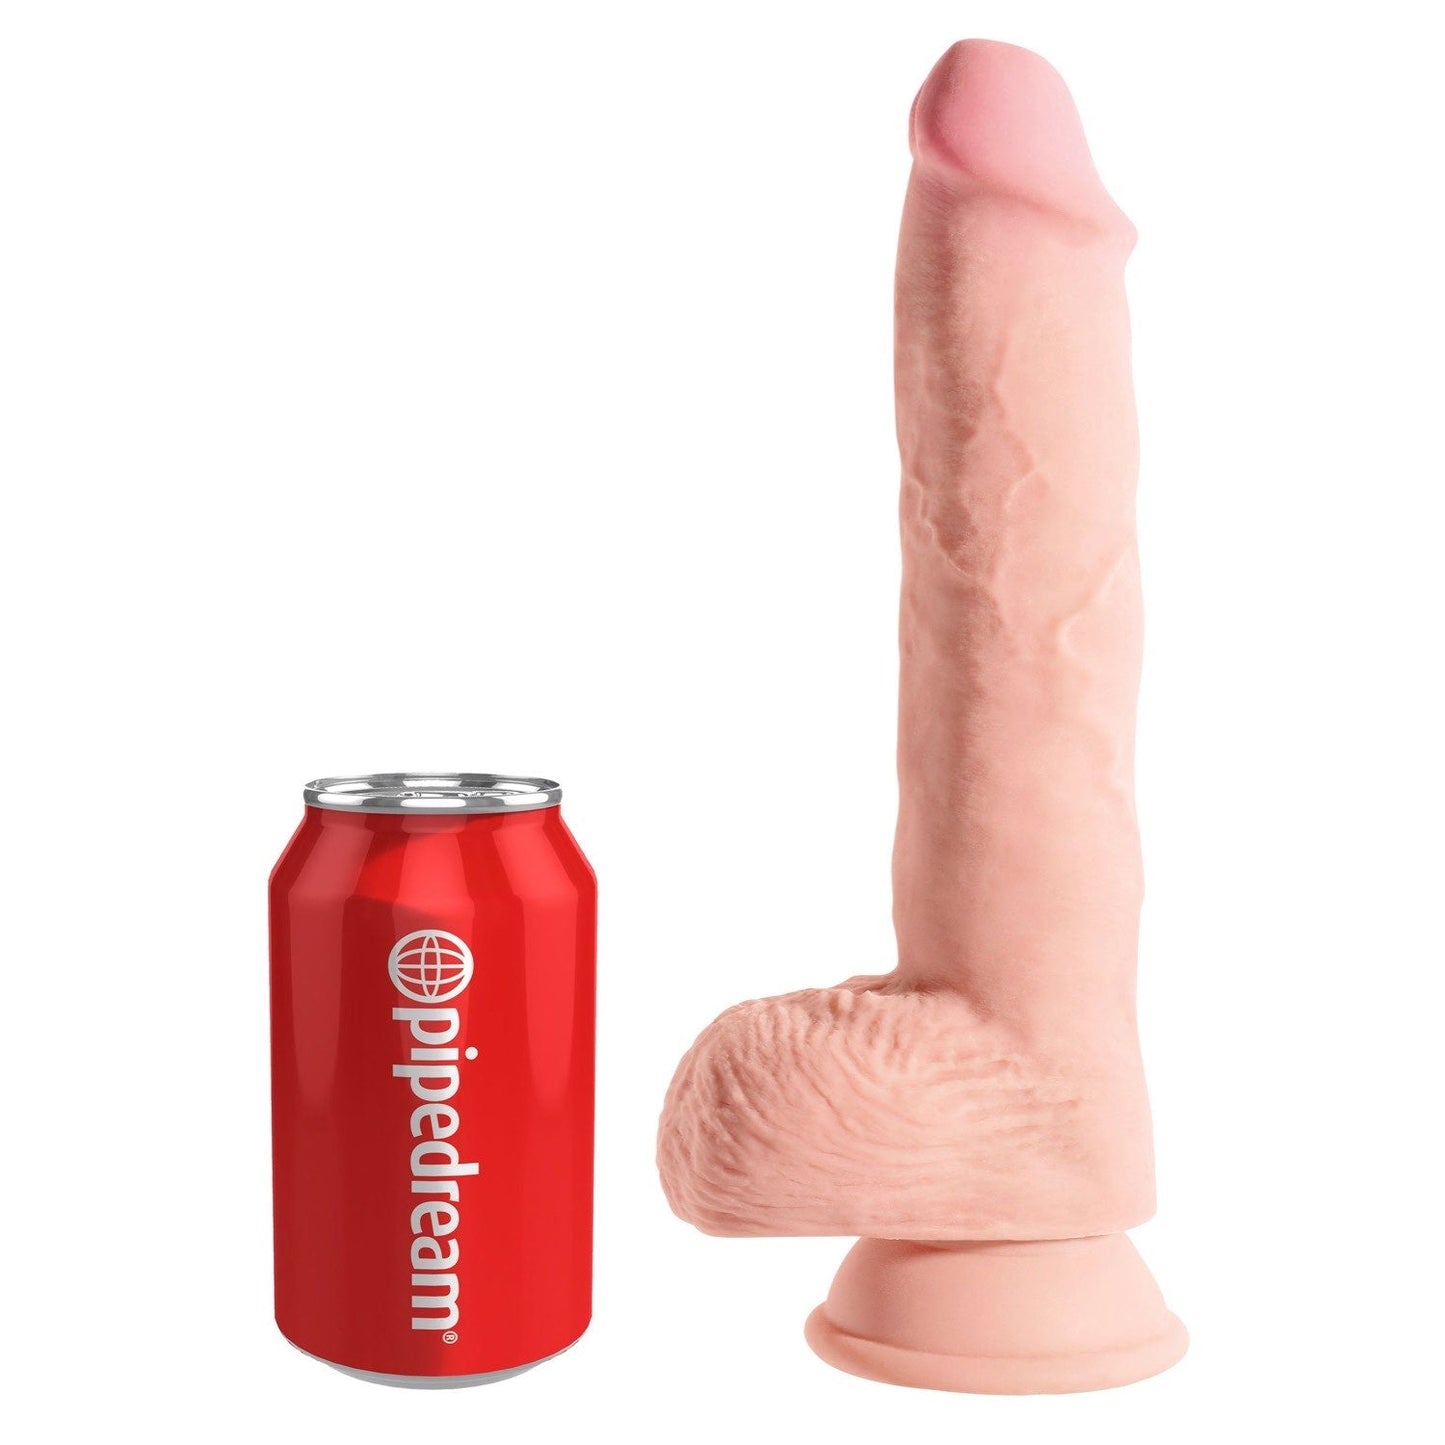 Plus 10" Triple Density Fat Cock with Balls - Flesh 25 cm Thick Dong